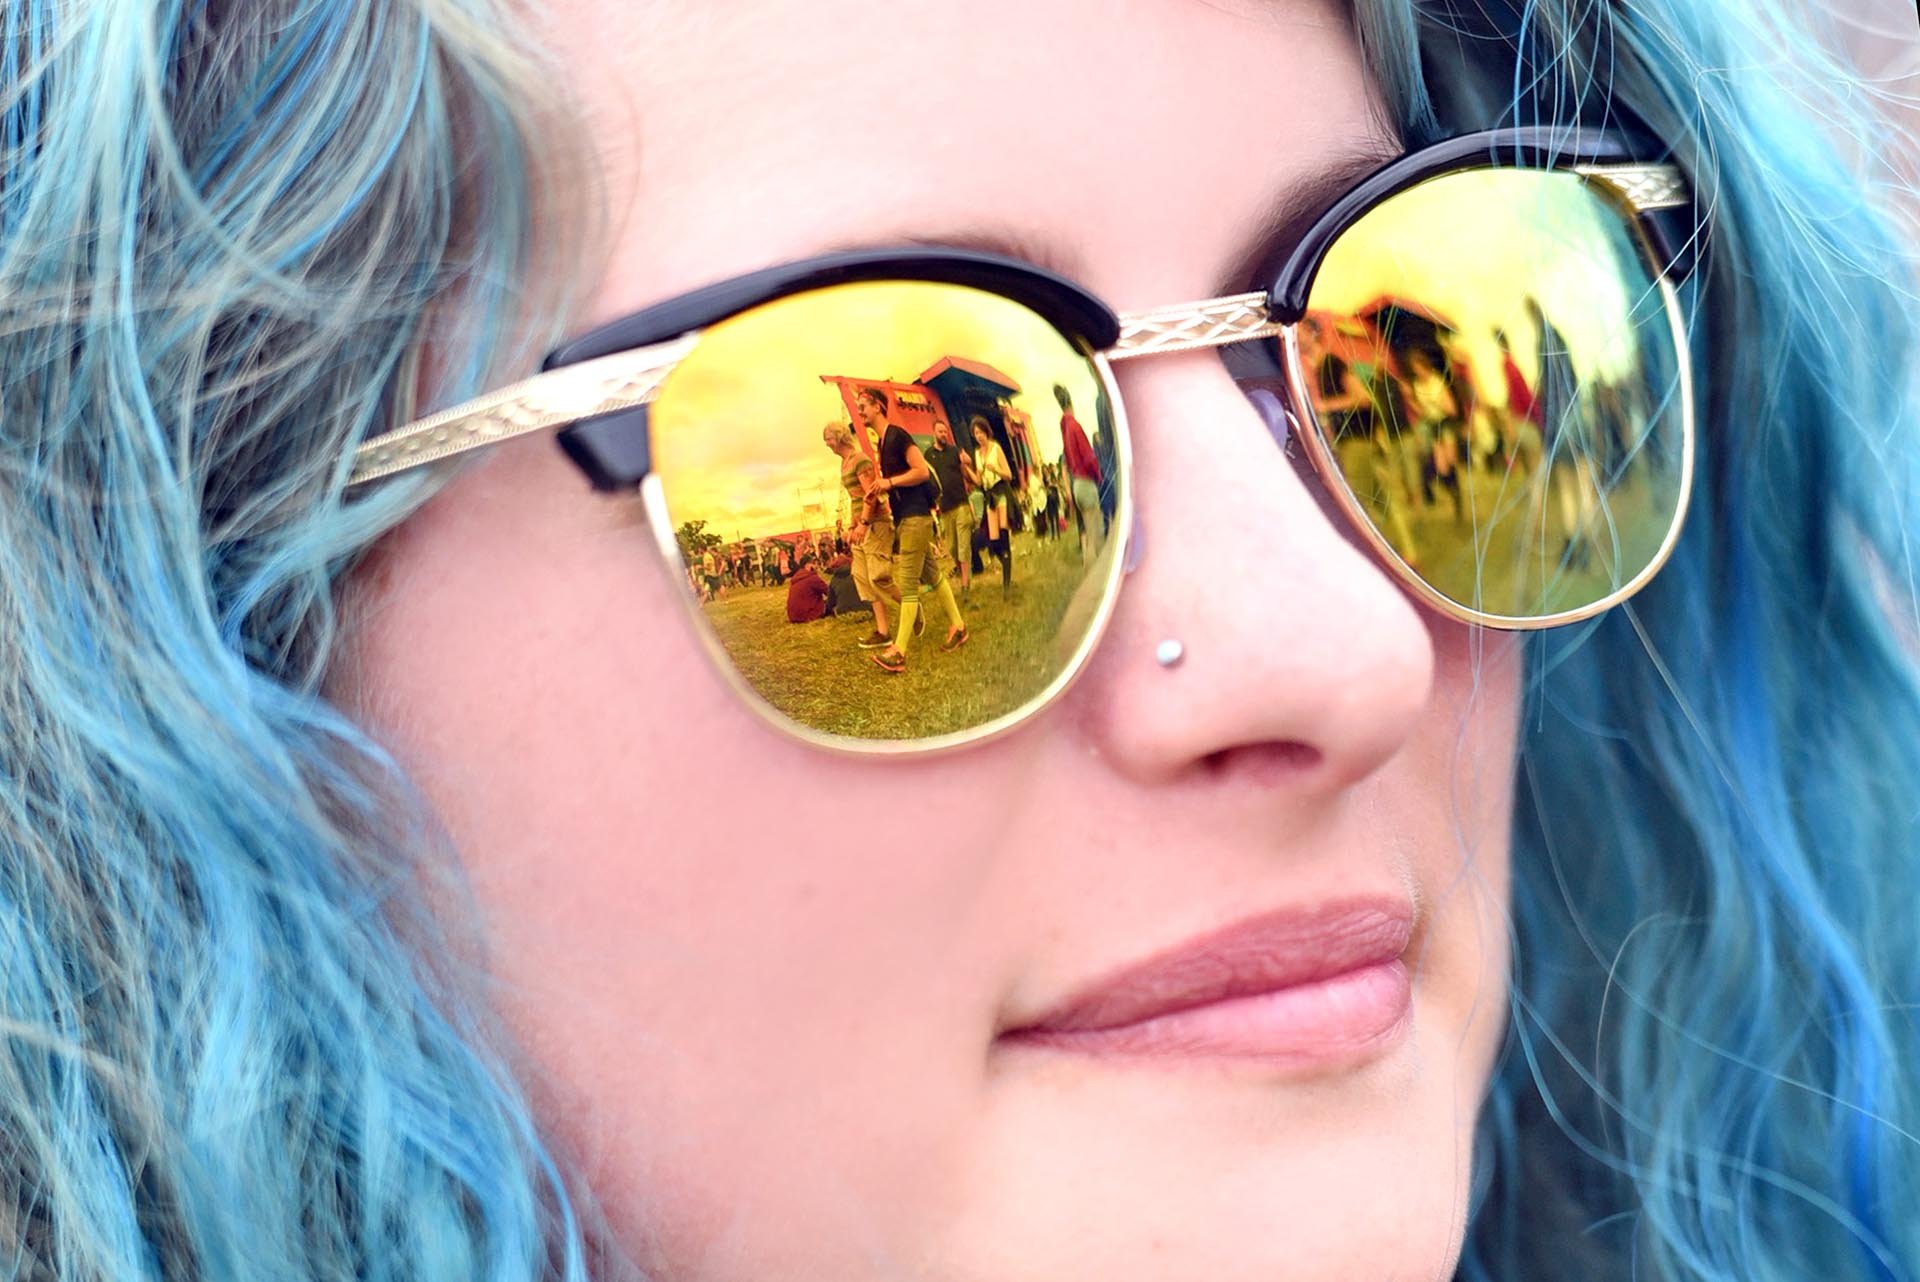 Reflection of Reading Festival in sunglasses.